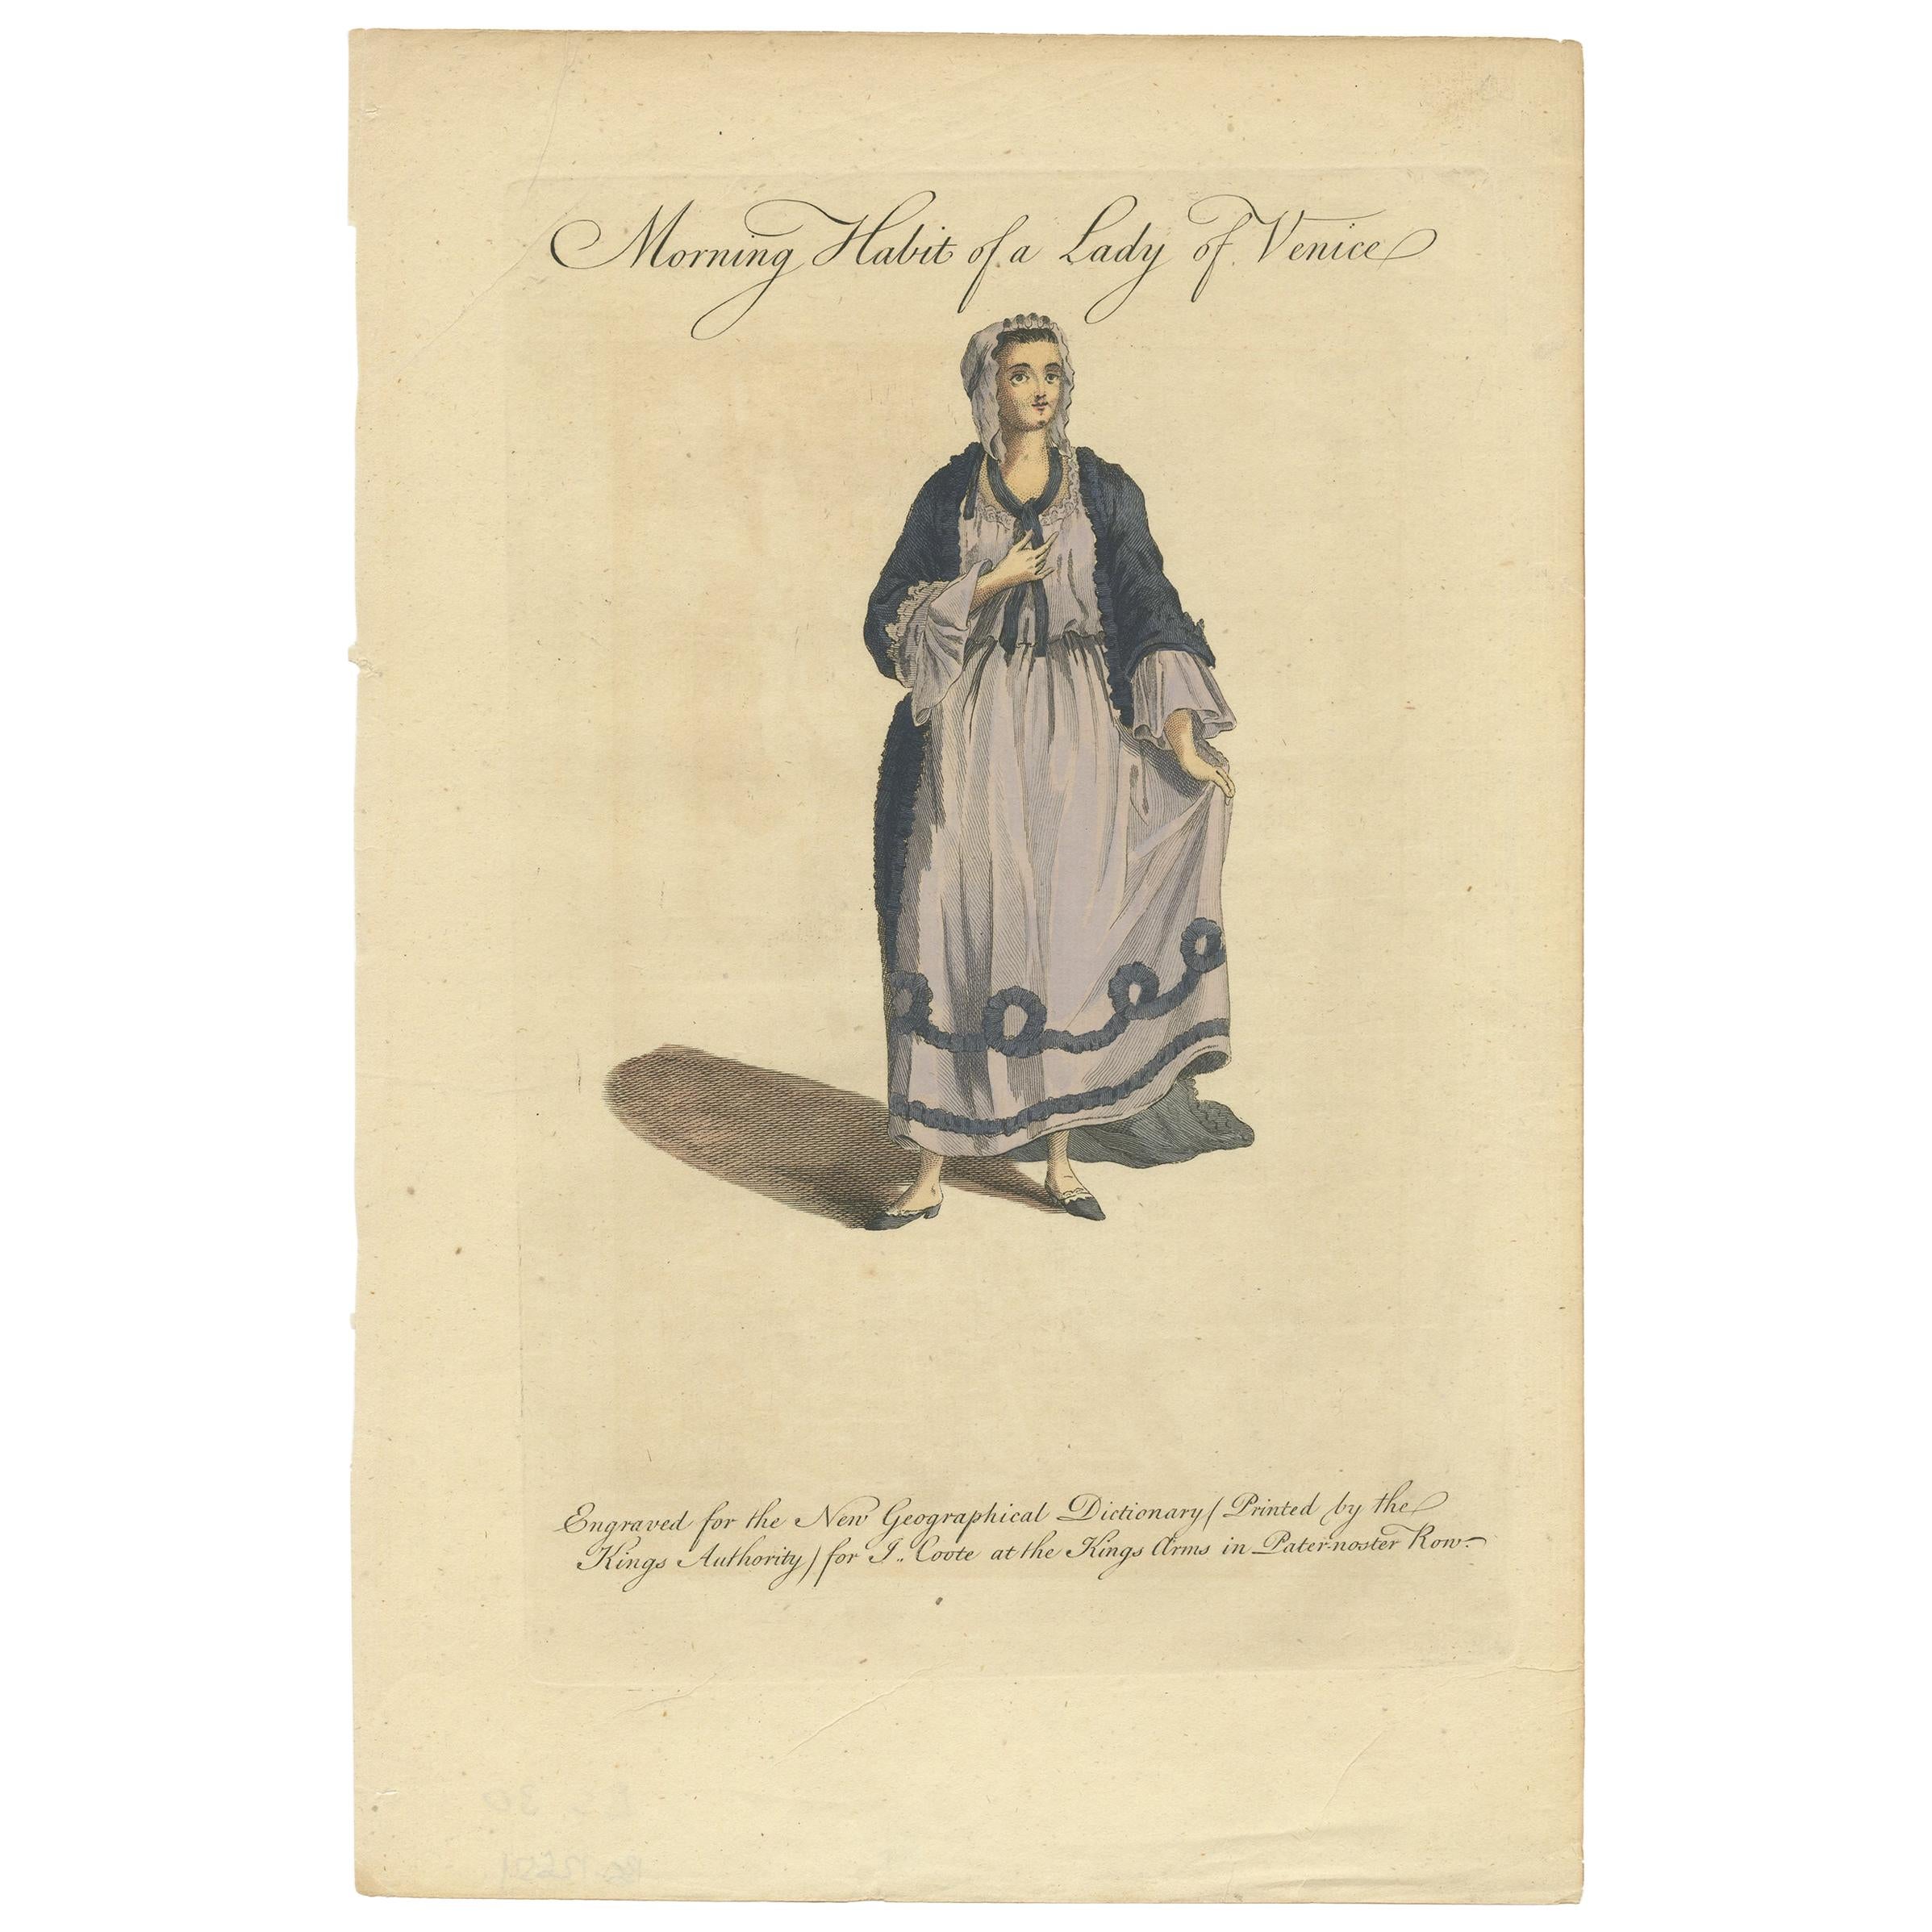 Antique Costume Print of the Morning Habit of a Lady of Venice by Coote 'c.1760' For Sale